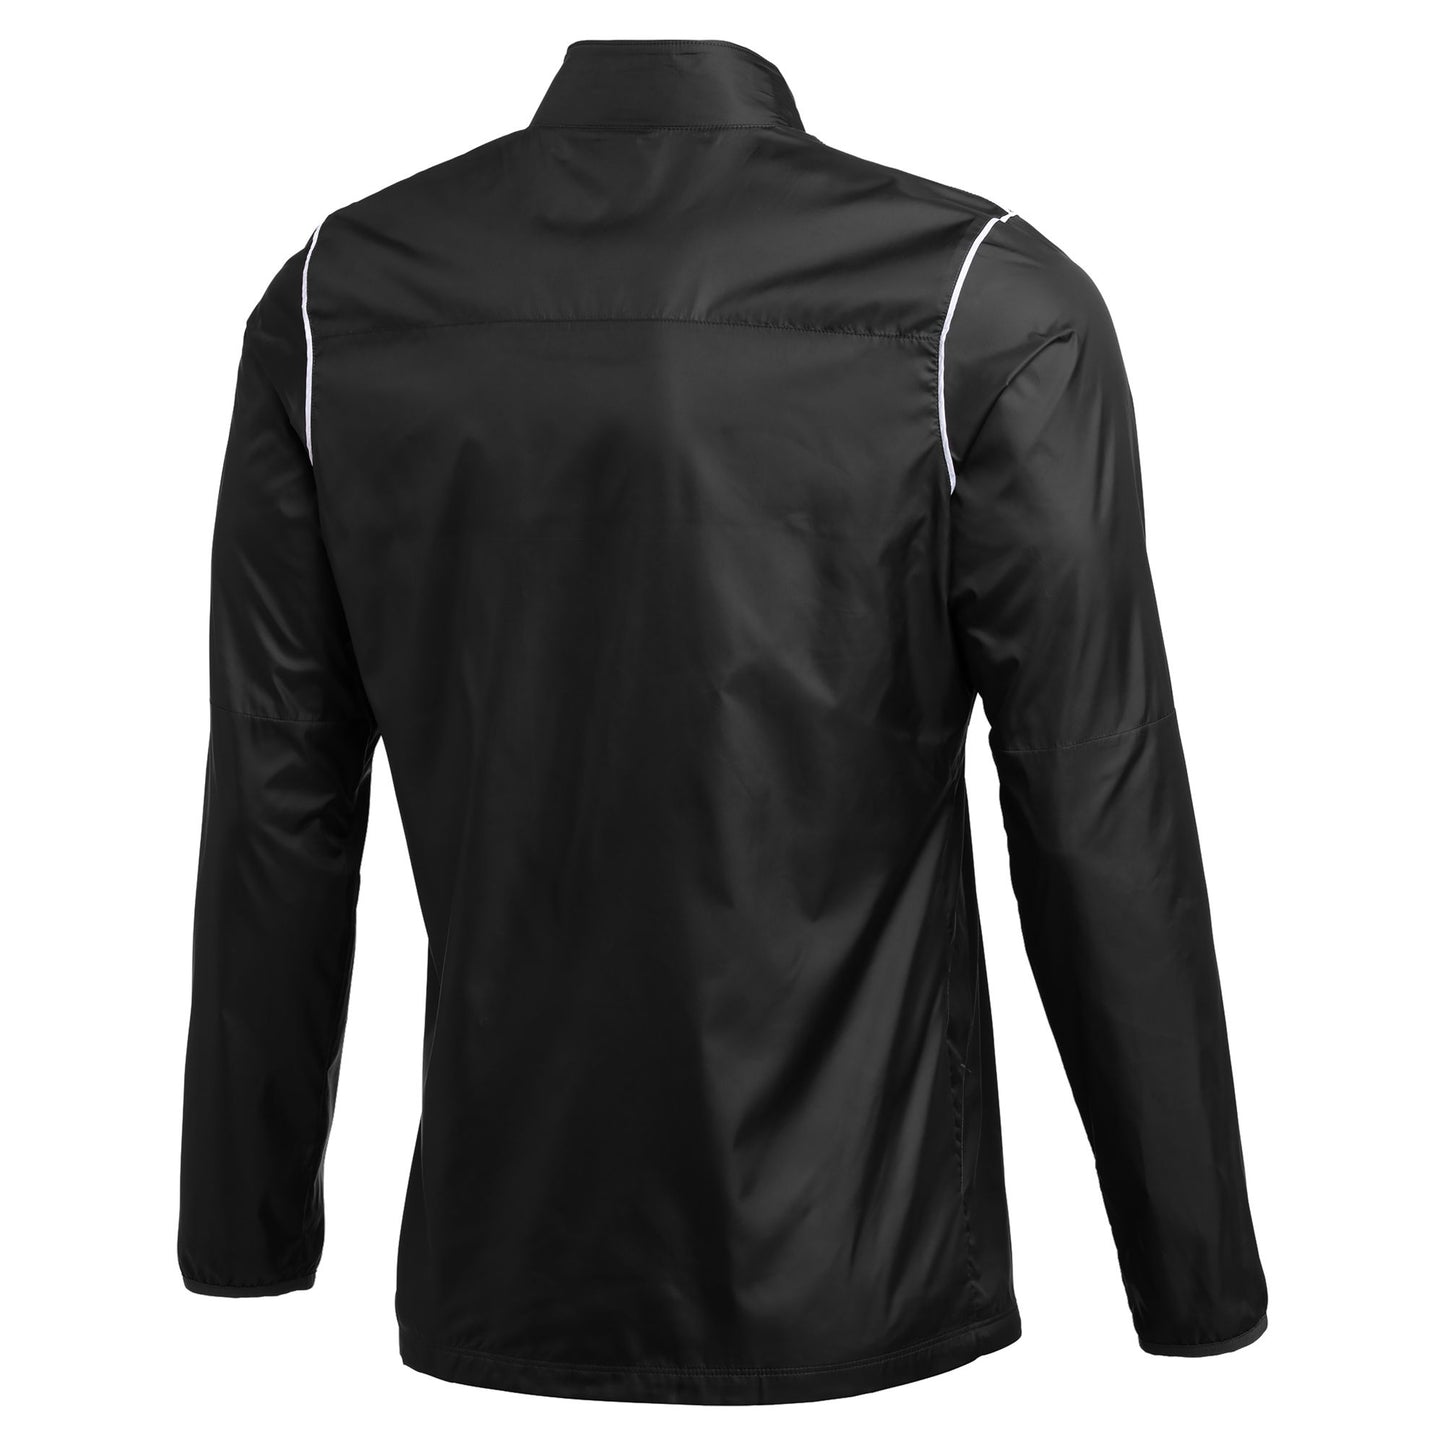 WOODLEIGH FC NIKE RAIN JACKET - YOUTH'S